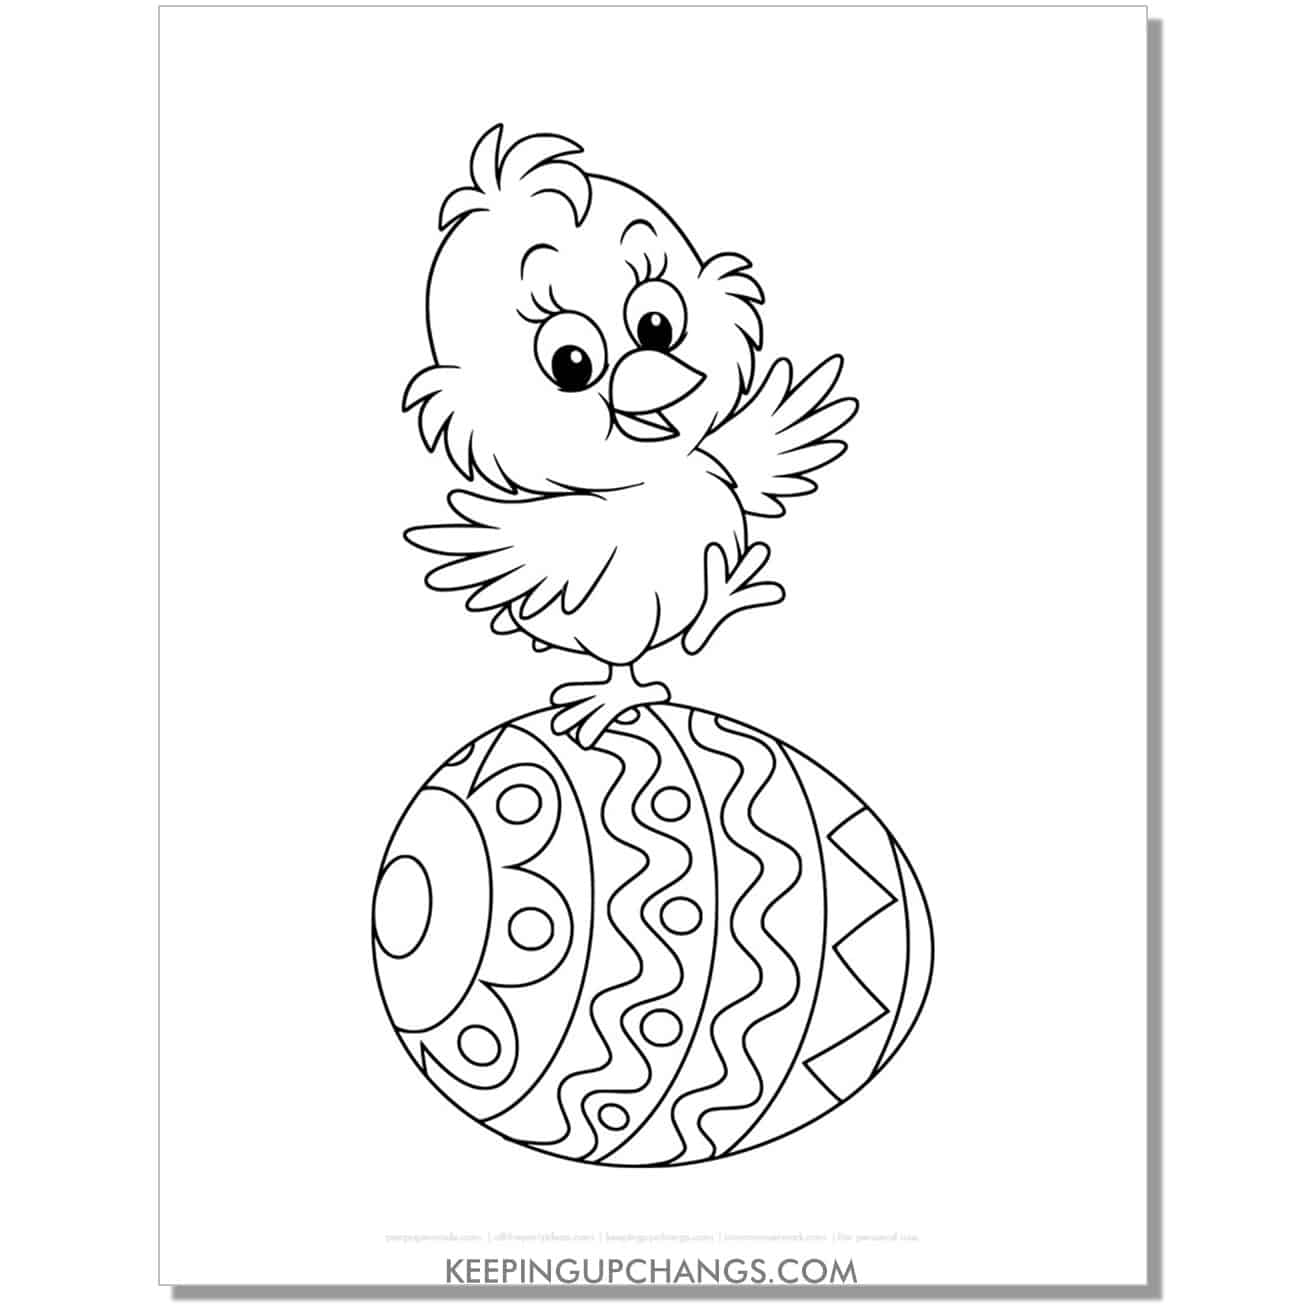 cute easter chick on egg coloring page, sheet.